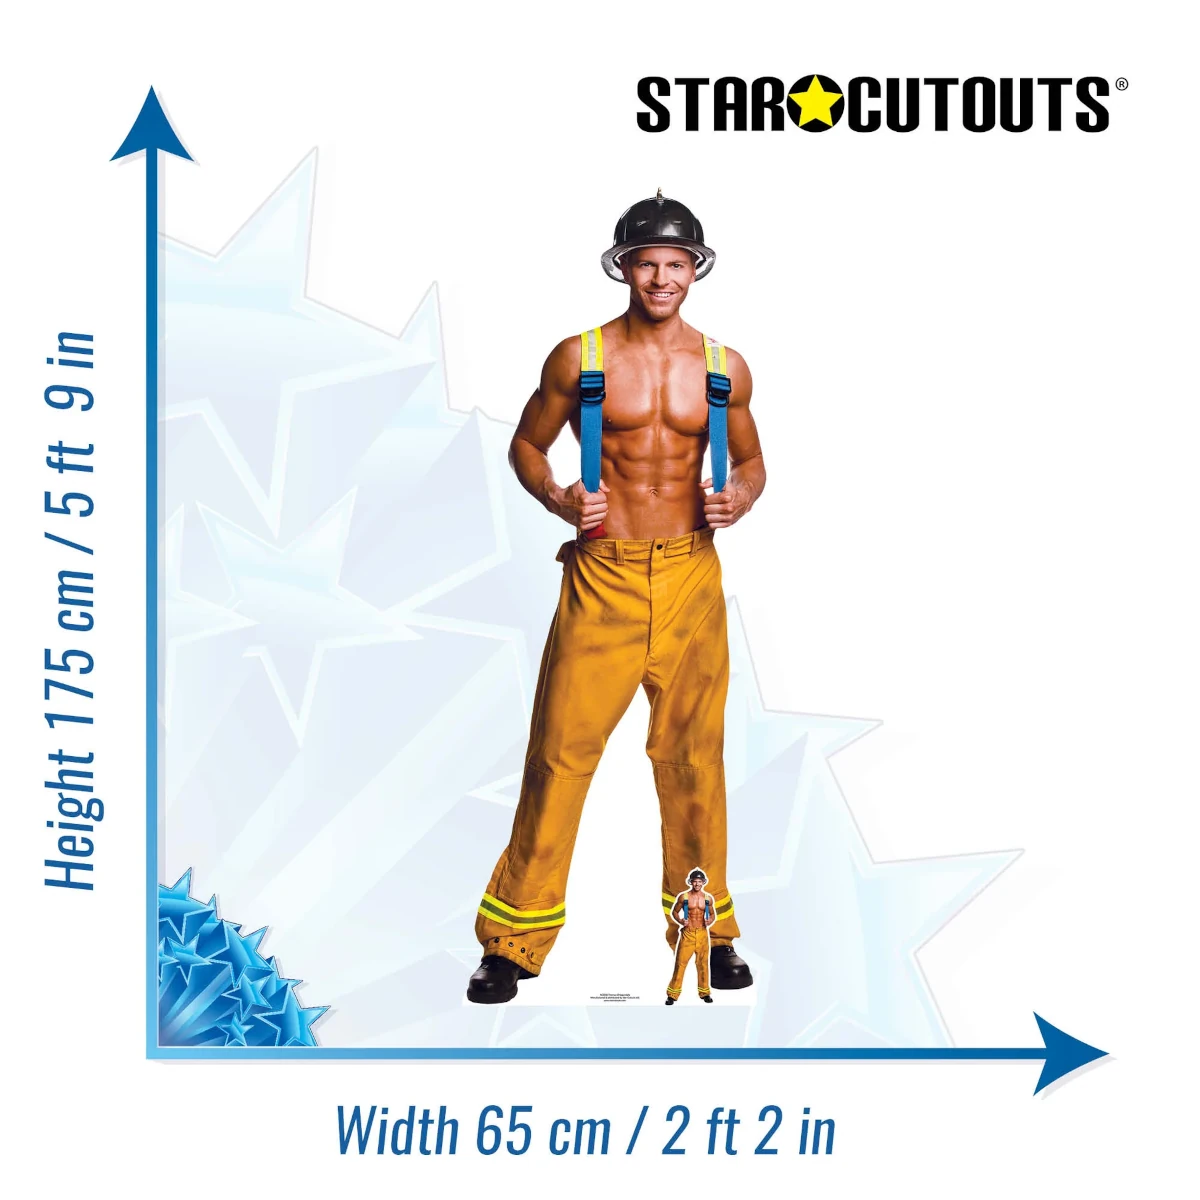 SC2156 Fireman (Chippendales) Official Lifesize + Mini Cardboard Cutout Standee Size